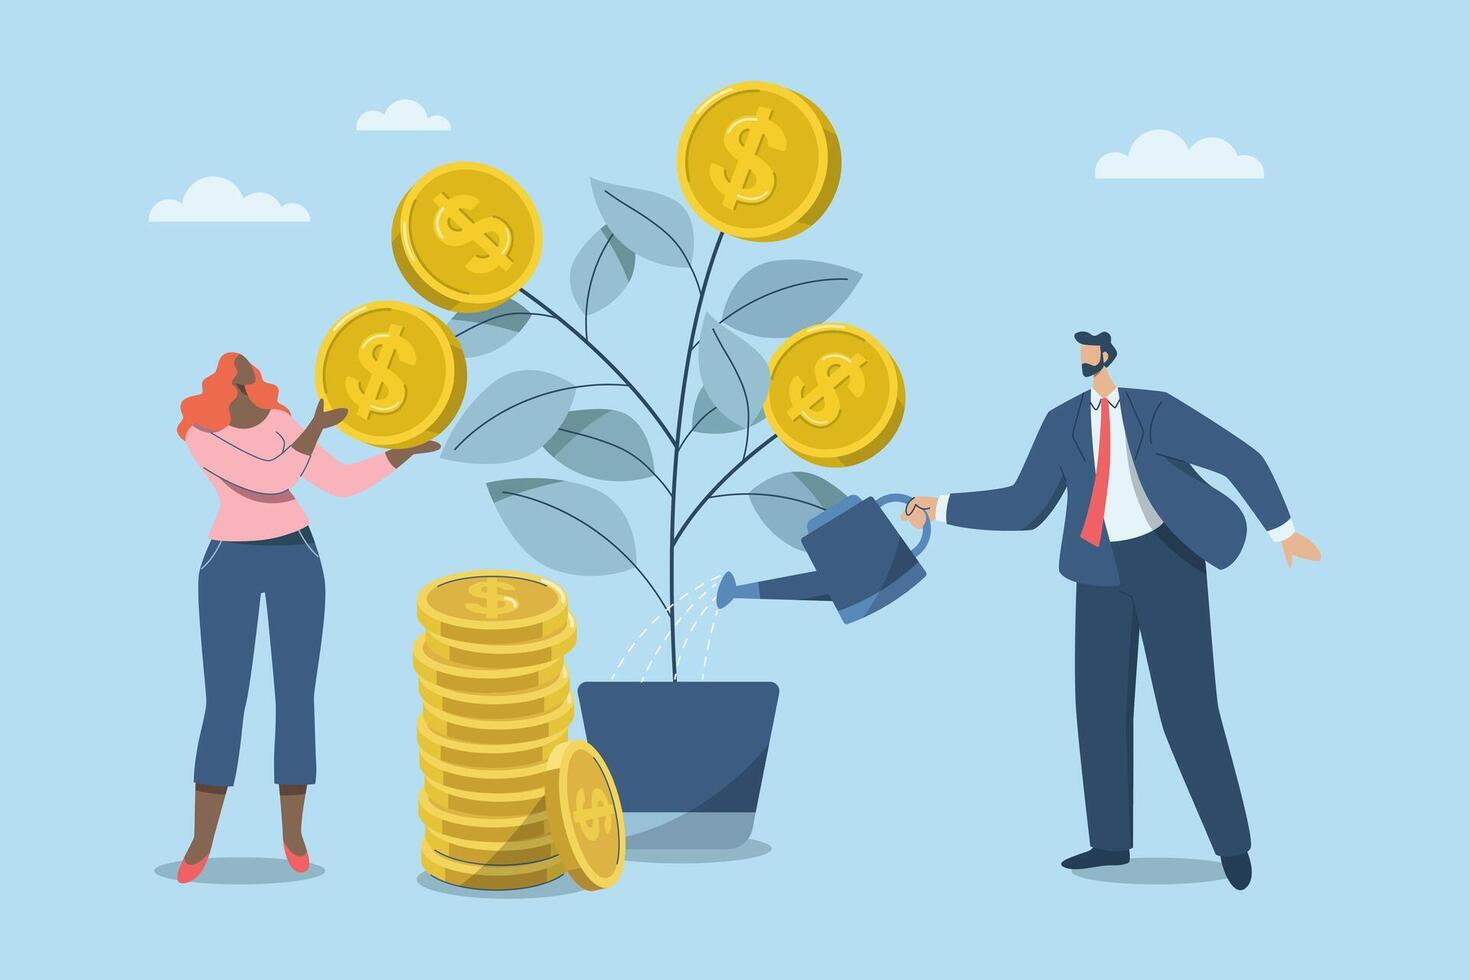 Successful investment, Growth or increased income from financial investments, Keeping money working to increase income, Business man and woman taking care of growing money plant and issuing coins. vector